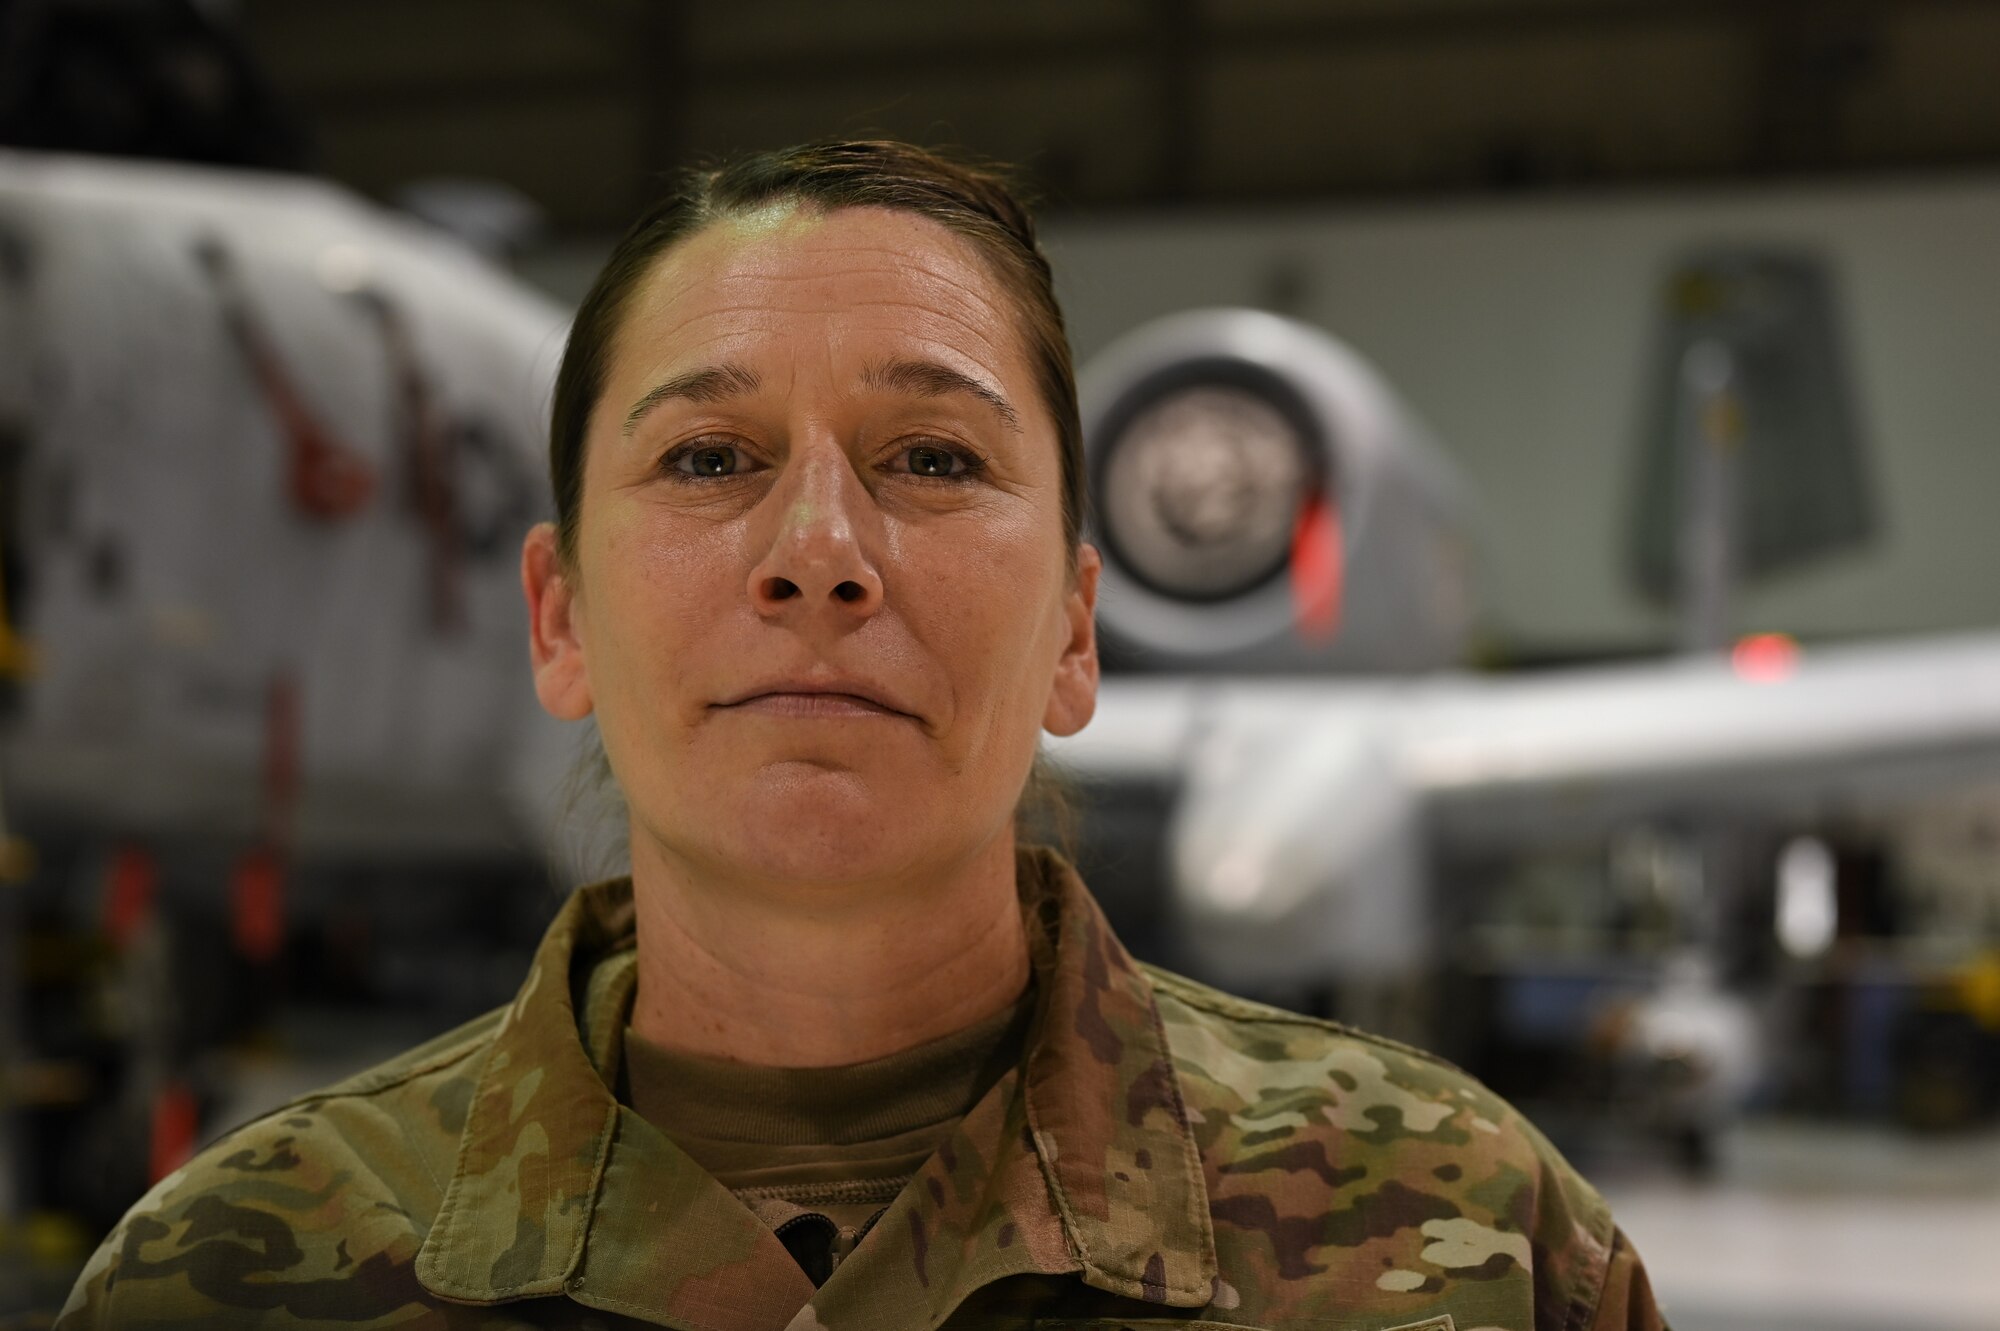 Senior Airman Jayme Bradley, an electrical and environmental specialist for the 175th Maintenance Squadron, Maryland National Guard, poses in front of an A-10C Thunderbolt II aircraft Dec. 18, 2020 at the Warfield Air National Guard Base at Martin State Airport, Middle River, Md.